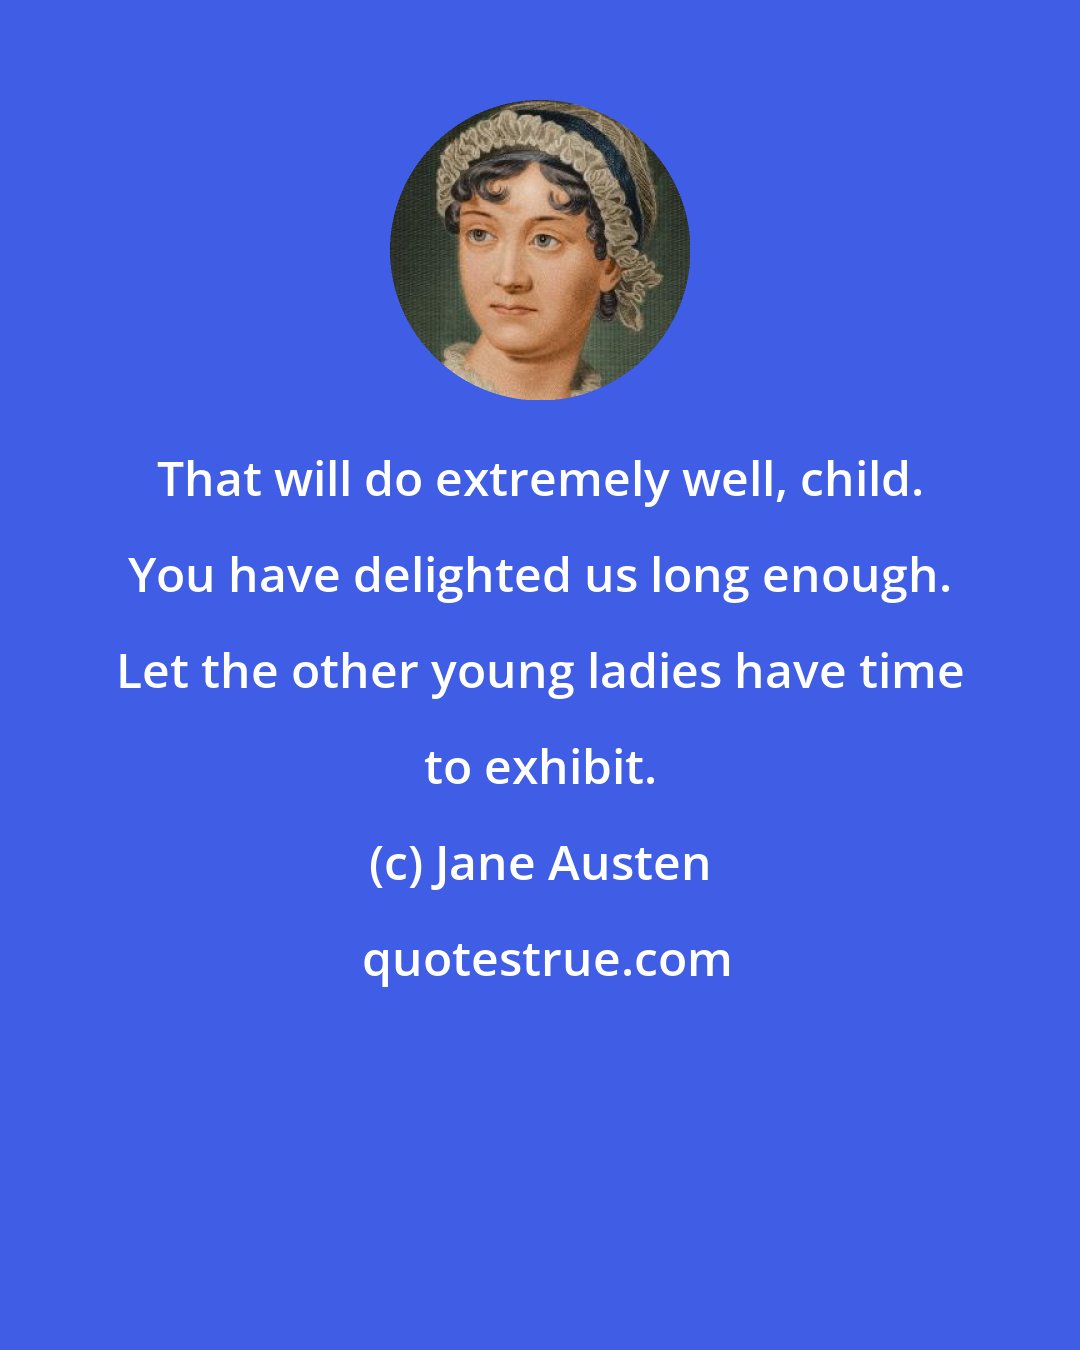 Jane Austen: That will do extremely well, child. You have delighted us long enough. Let the other young ladies have time to exhibit.